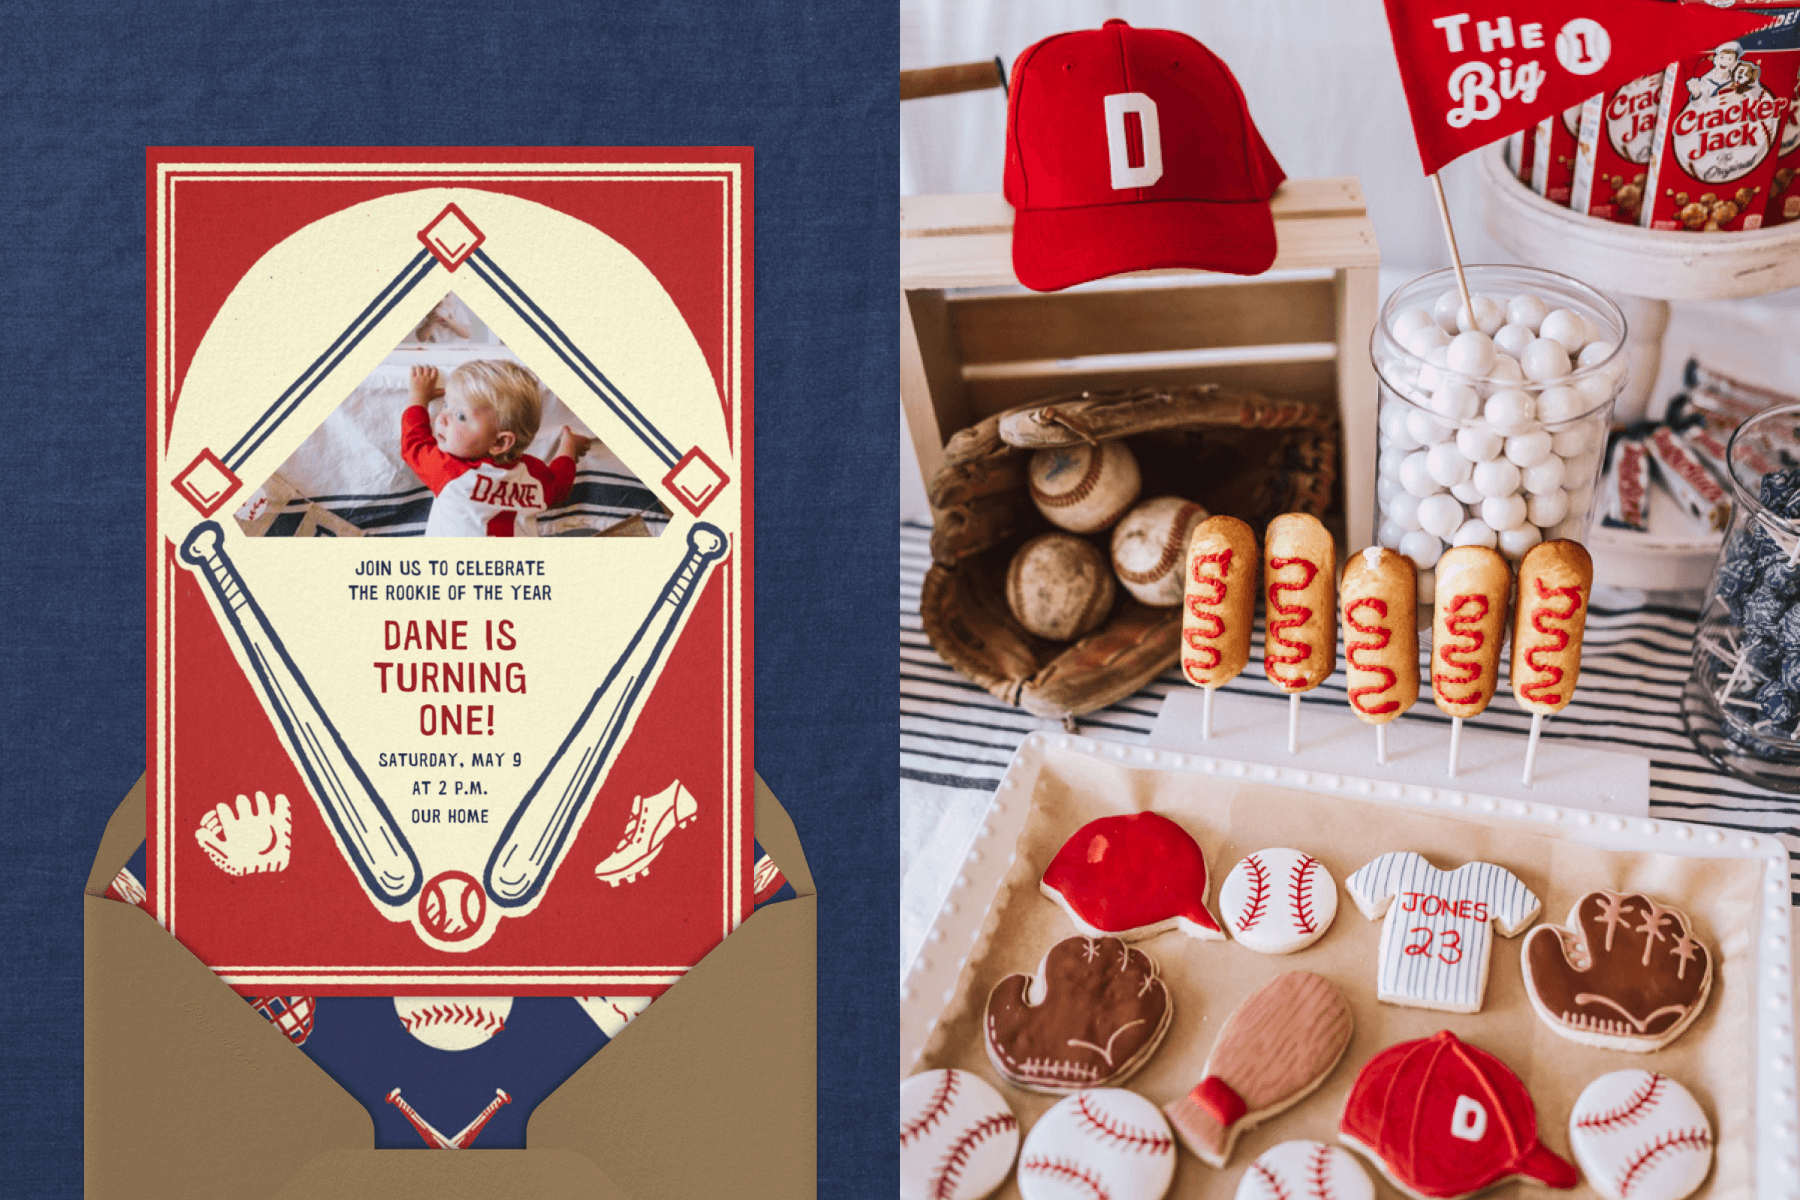 Left: A red and cream birthday invitation designed to resemble a baseball diamond and a photo of a young boy in the center reads “Dane is turning one!” Right: A table set for a baseball-themed party with decorated sugar cookies in baseball, jersey, cap, and glove shapes, mini corn dogs, a red cap and glove, and Cracker Jacks.